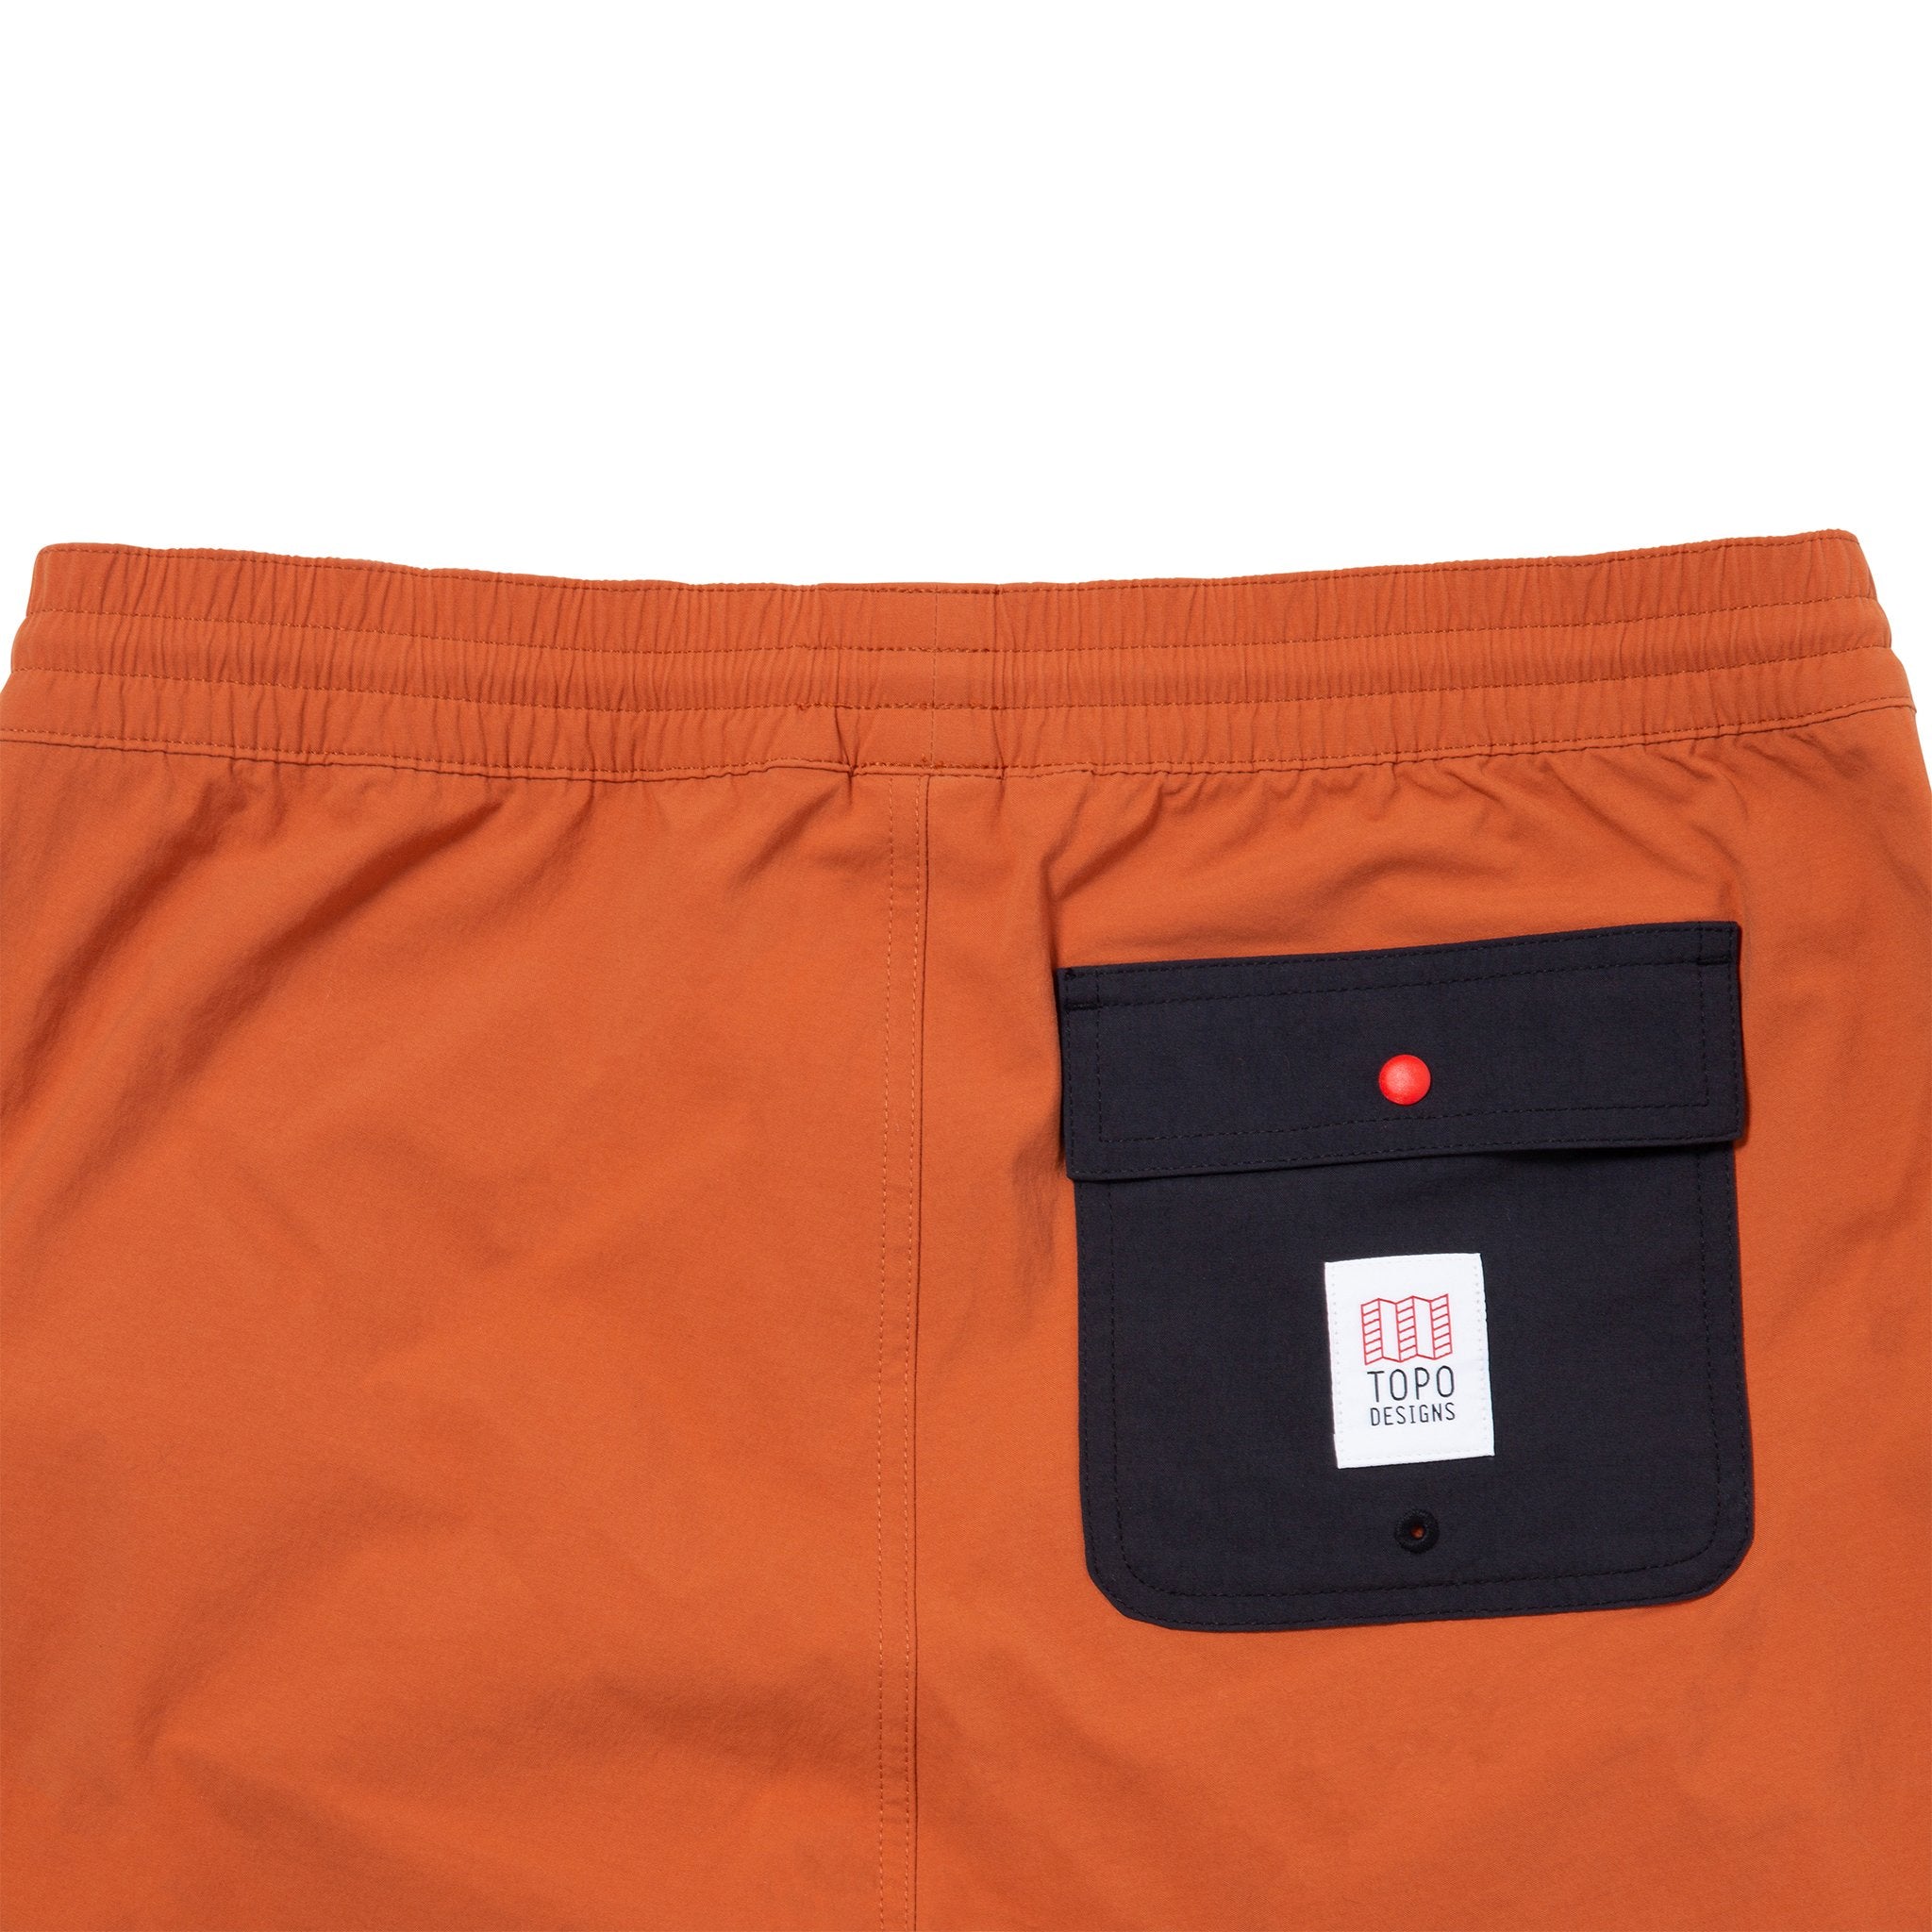 Back detail shot of Topo Designs Men's Global Shorts in Clay showing rear snap pocket with drain grommet